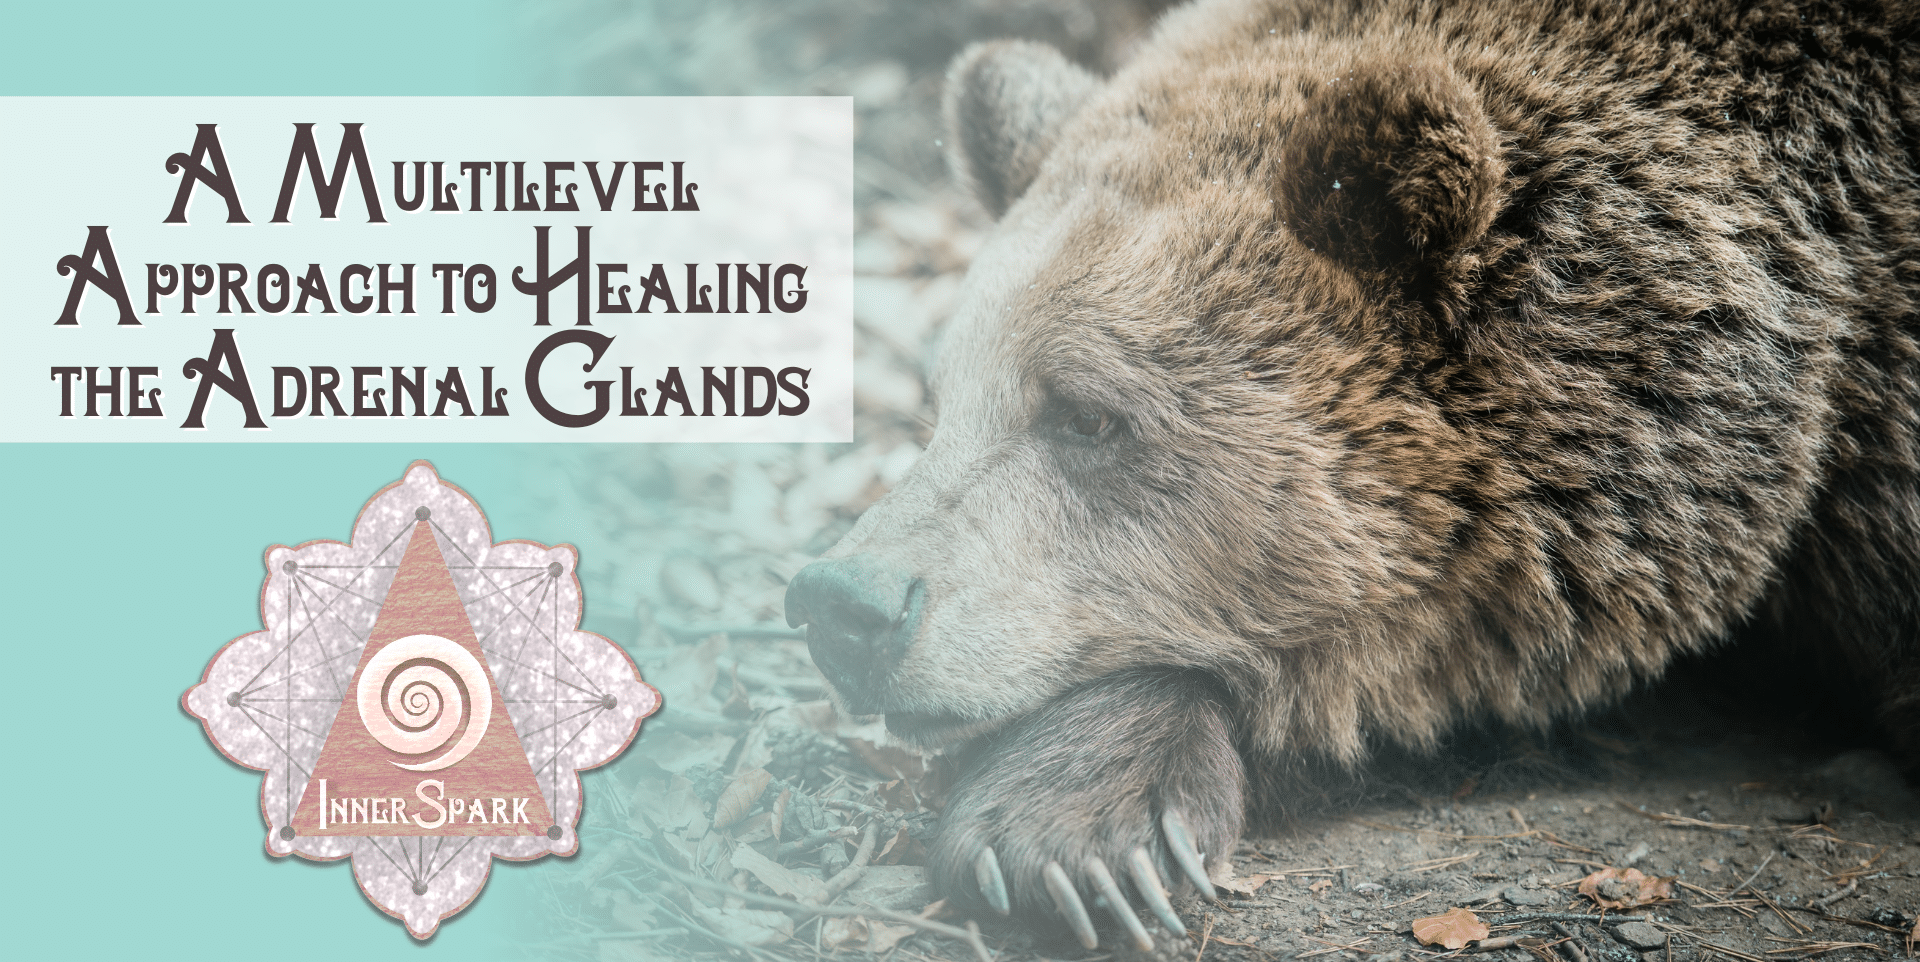 A Multilevel Approach to Healing the Adrenal Glands